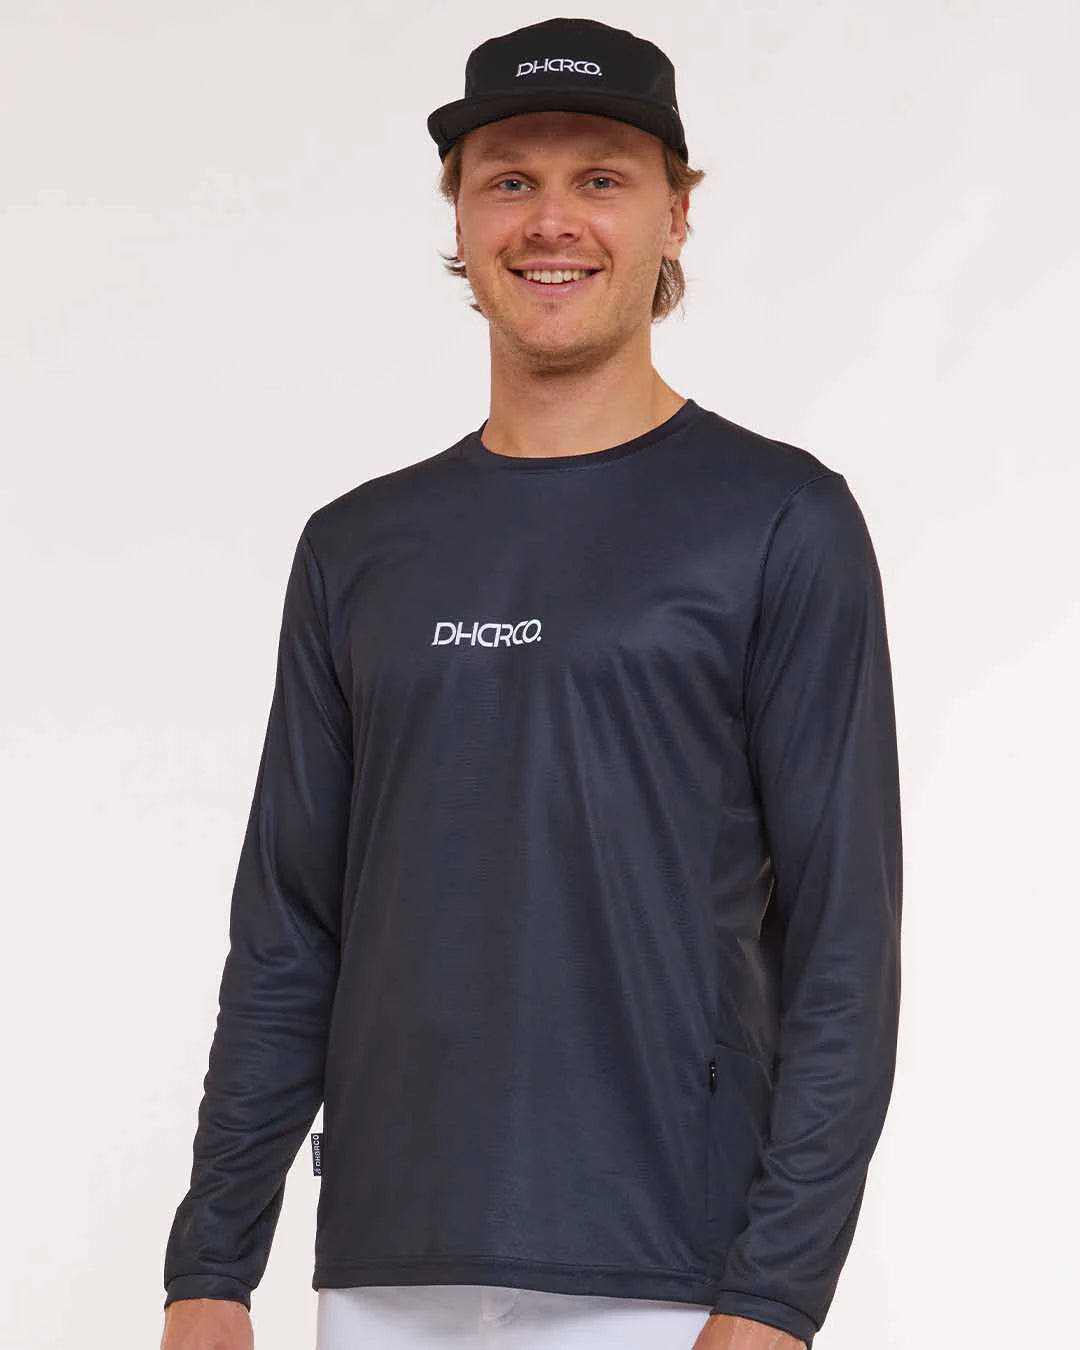 DHaRCO Mens Gravity Jersey